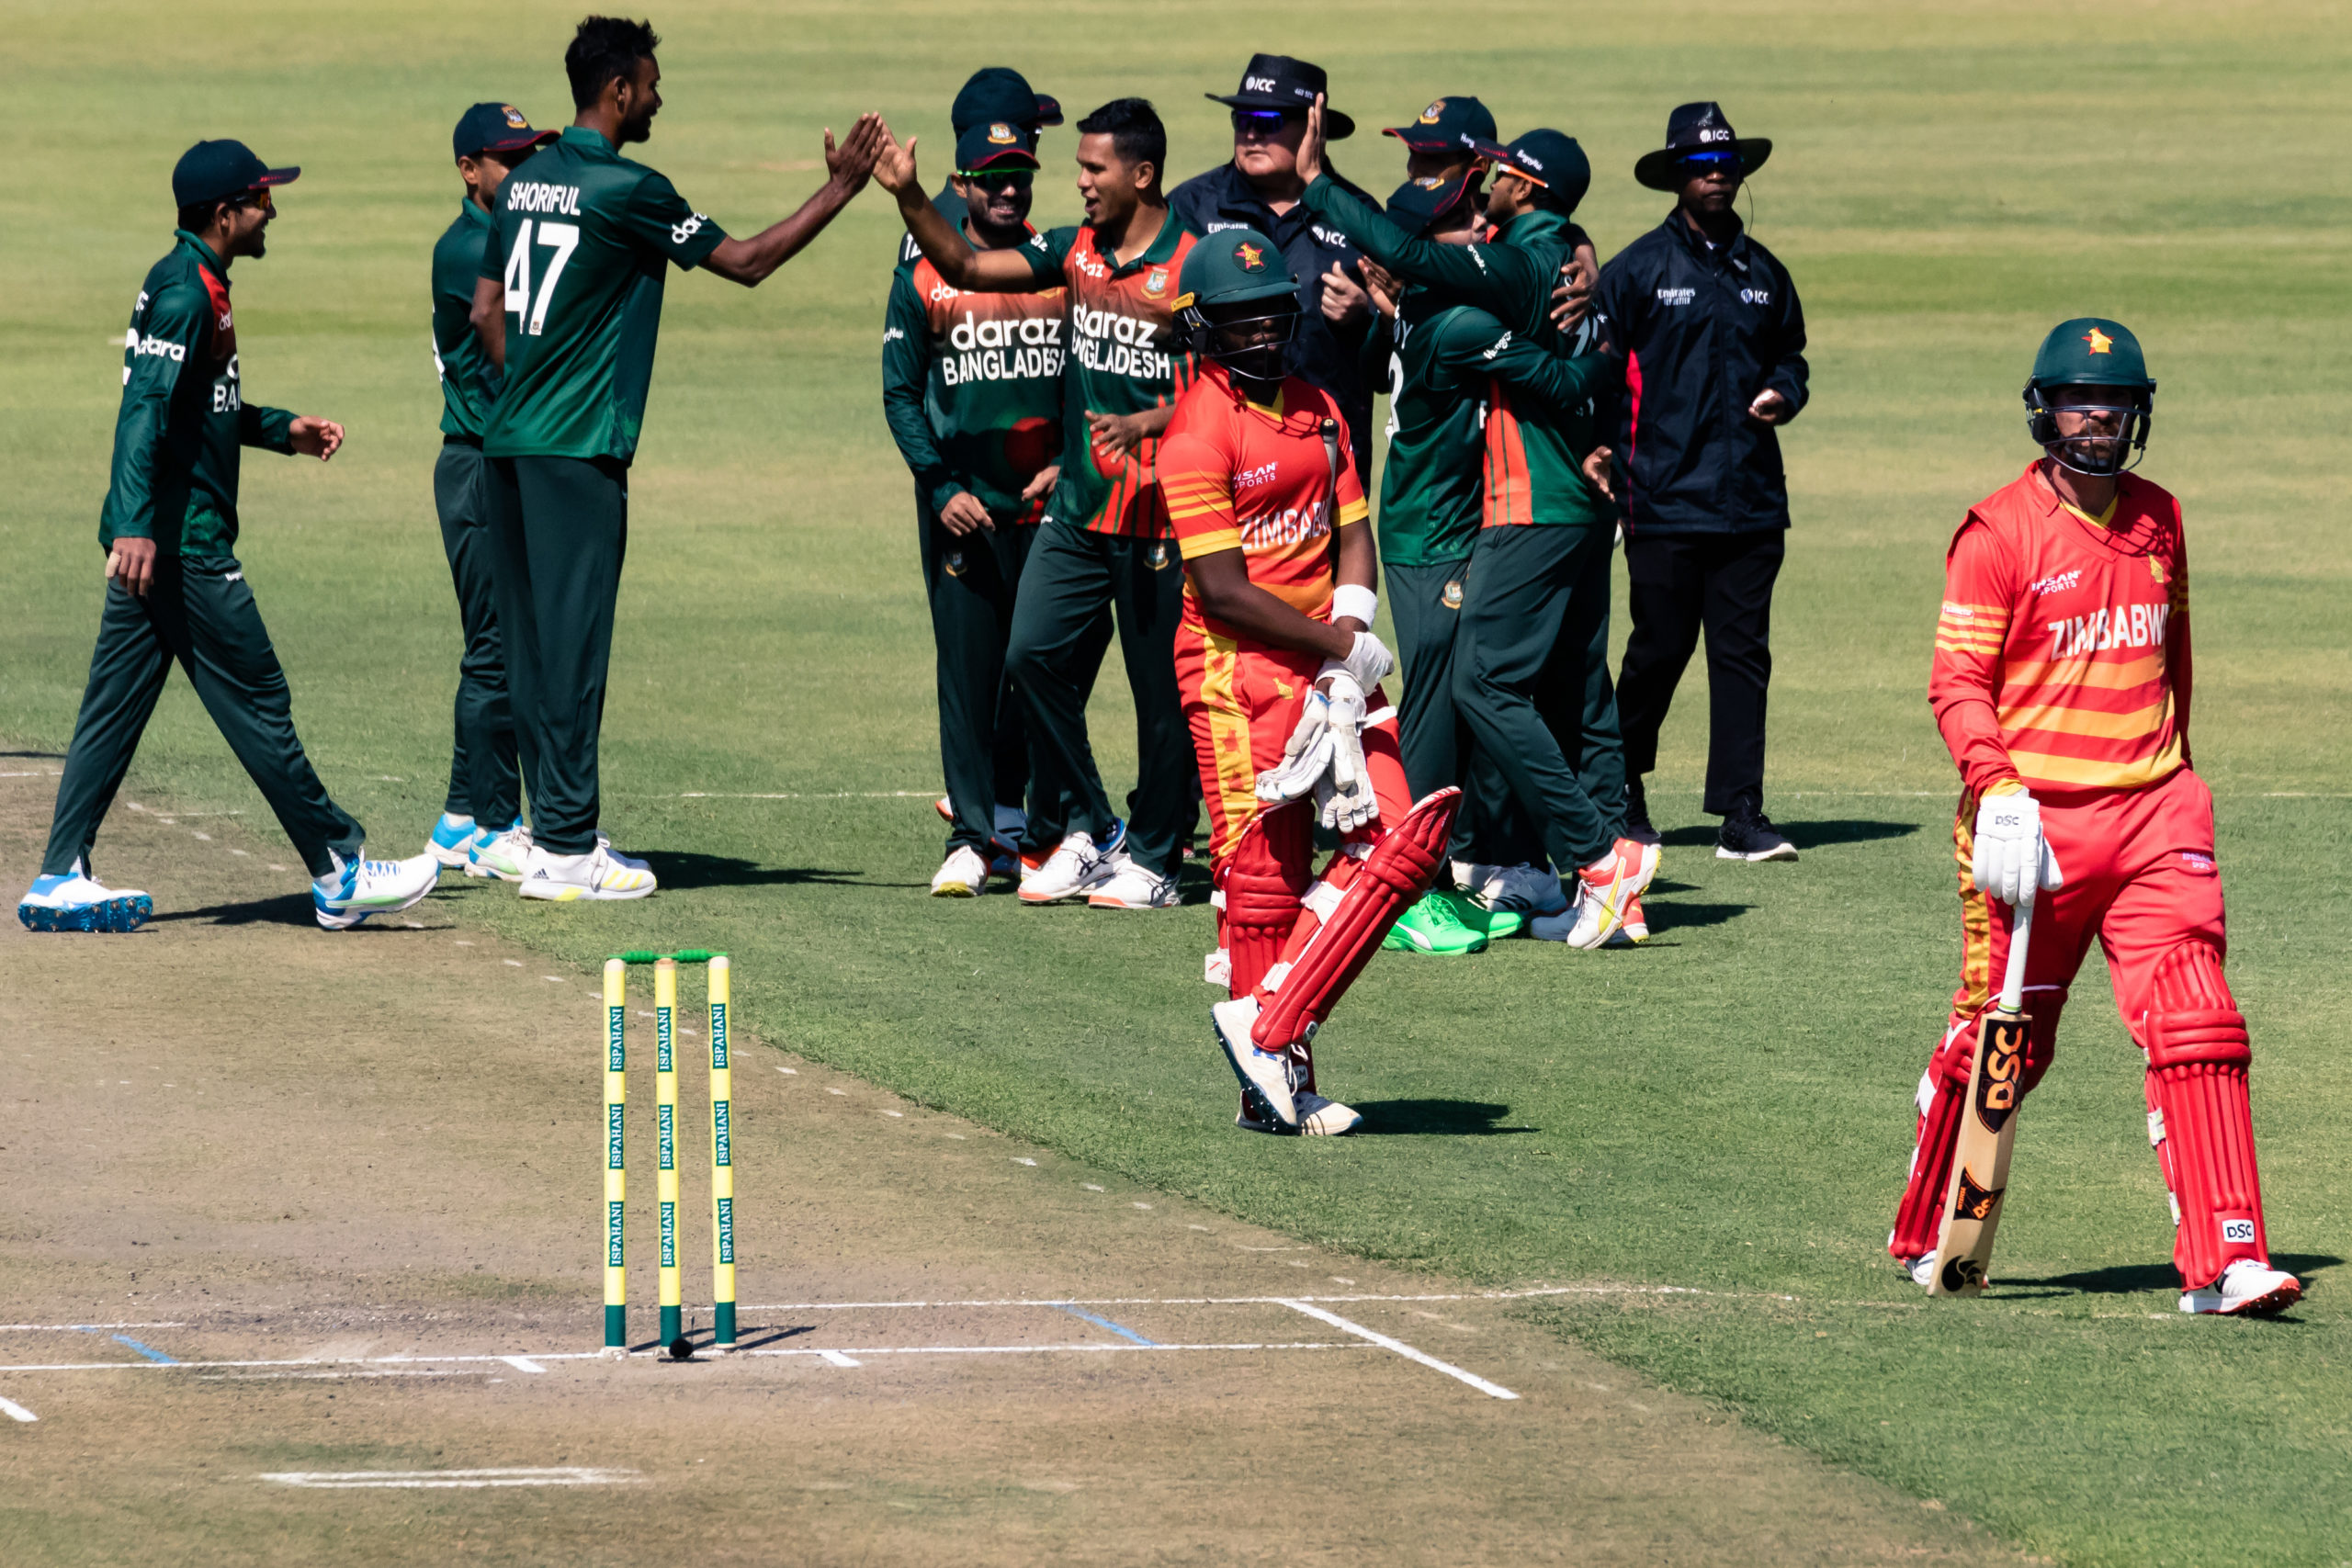 Zimbabwe take it down to the wire but Bangladesh prevail